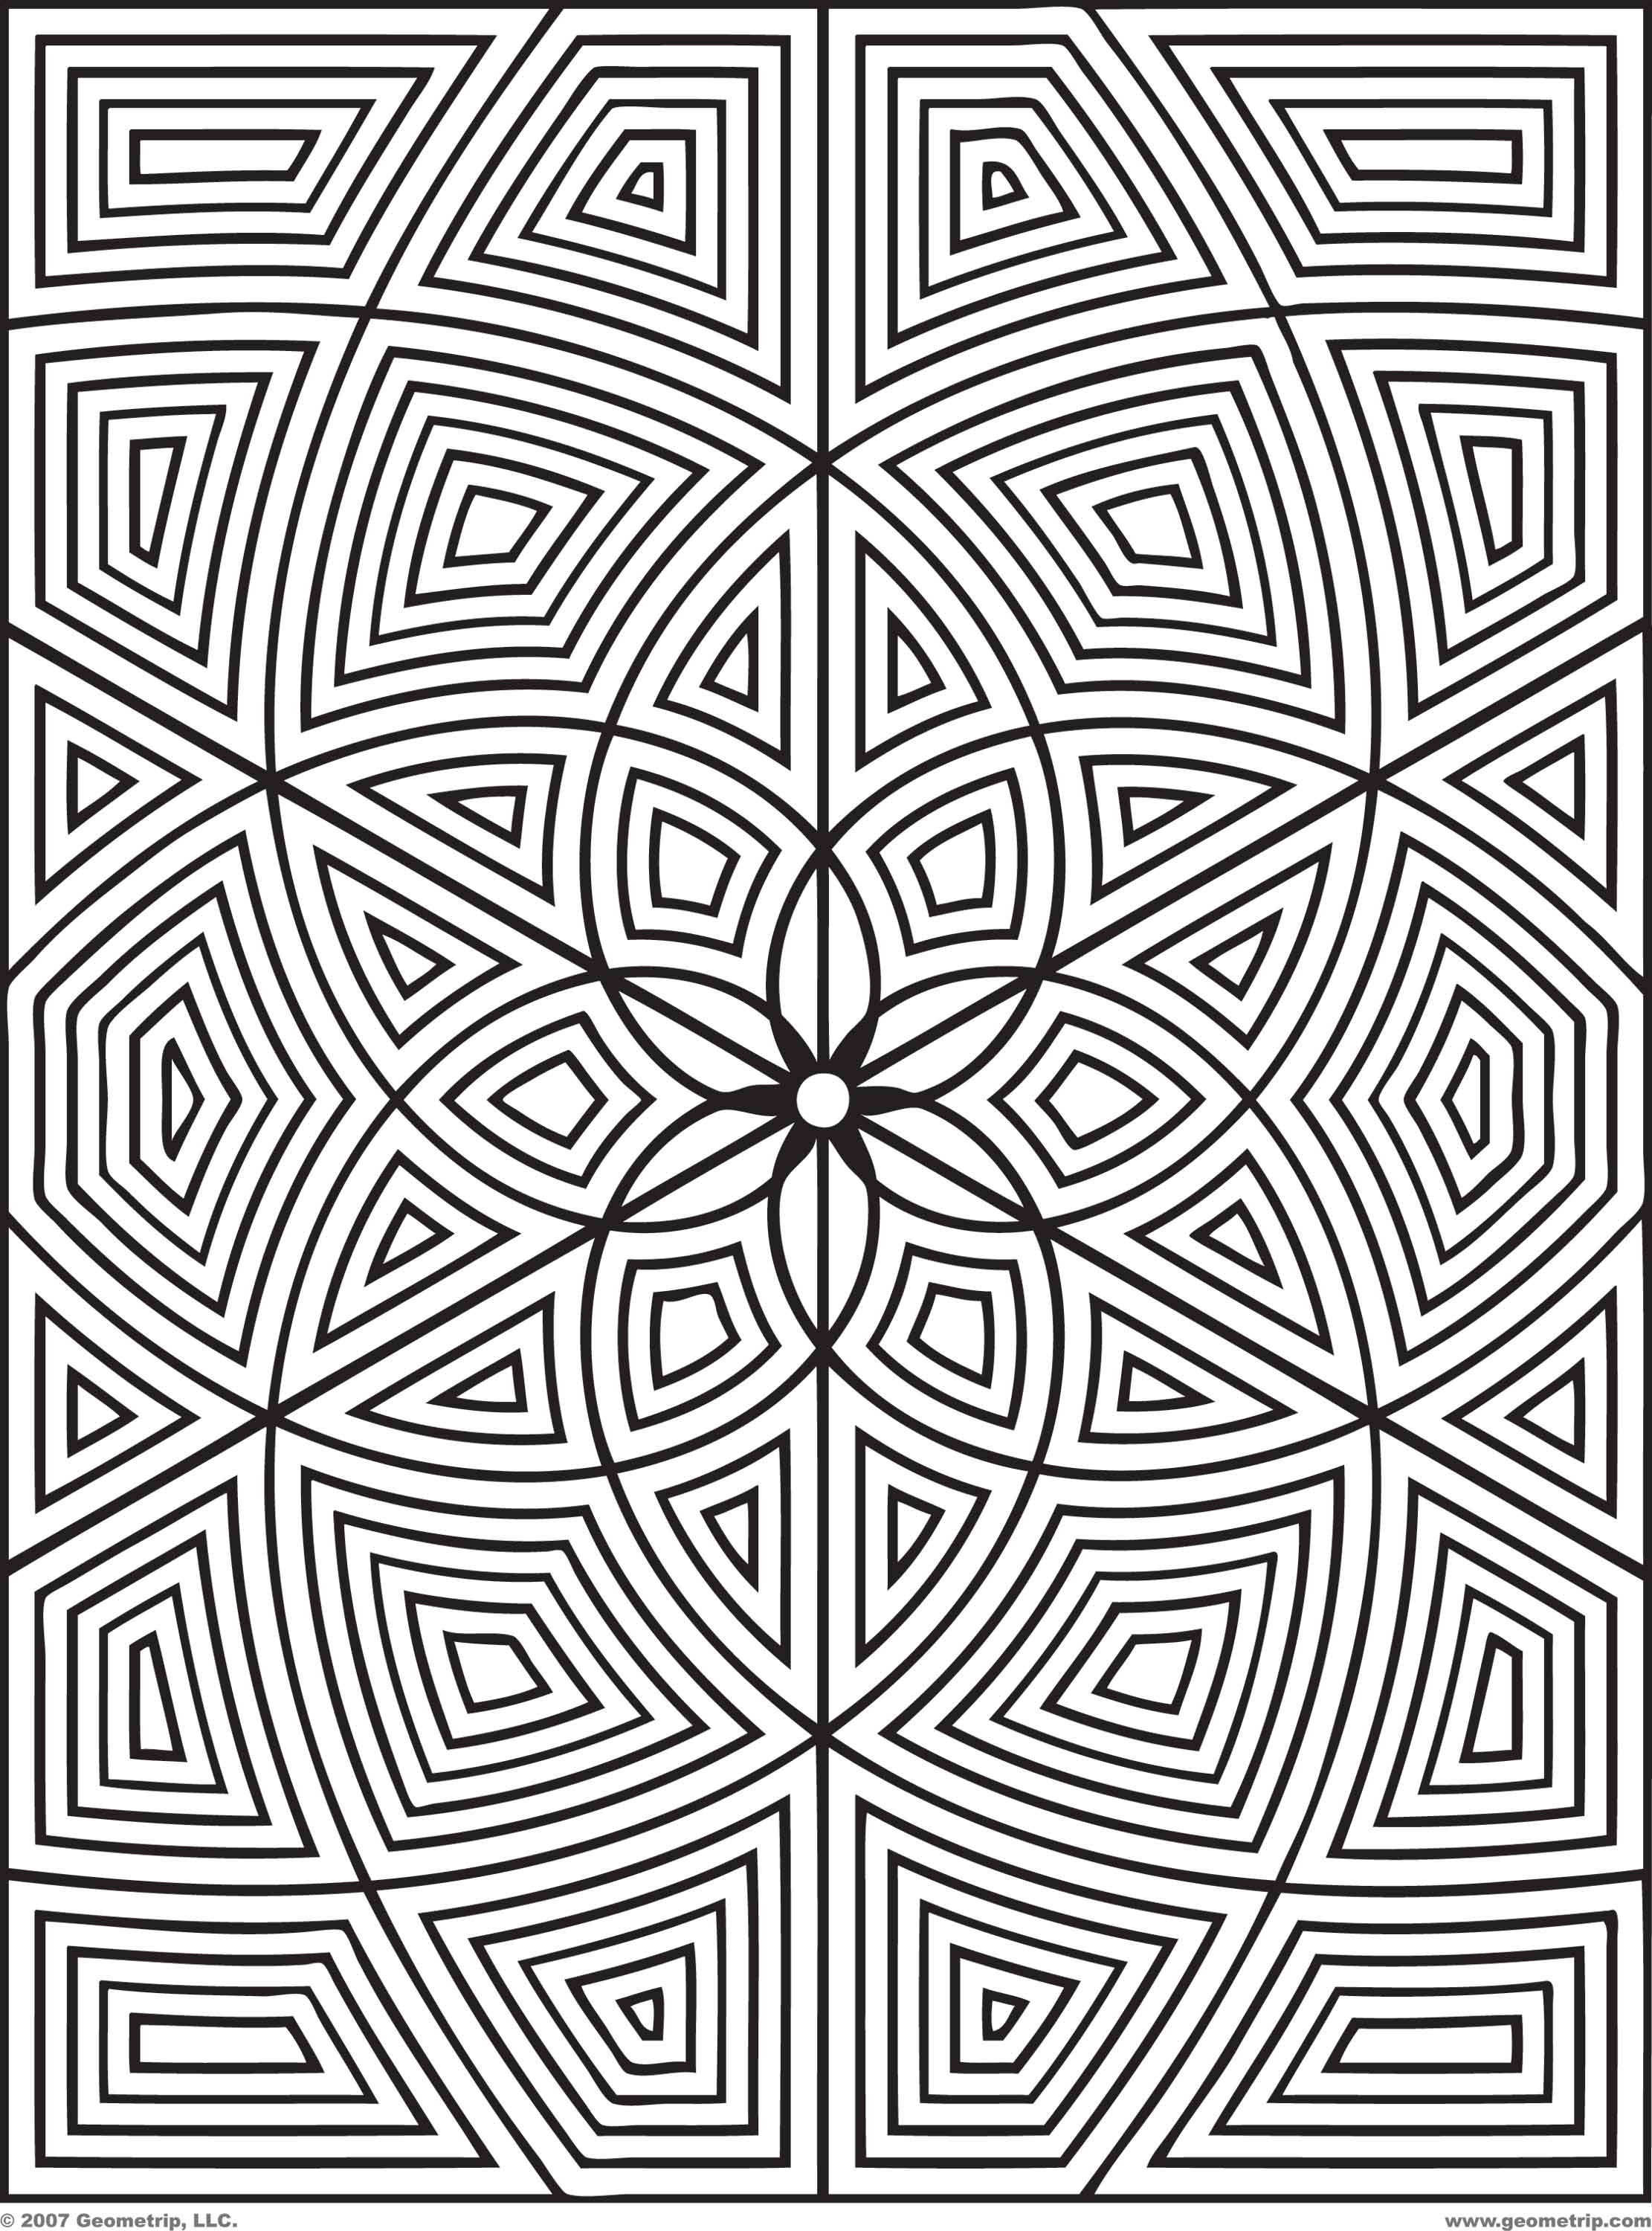 6 Best Images of Geometric Printable Coloring Pages ...